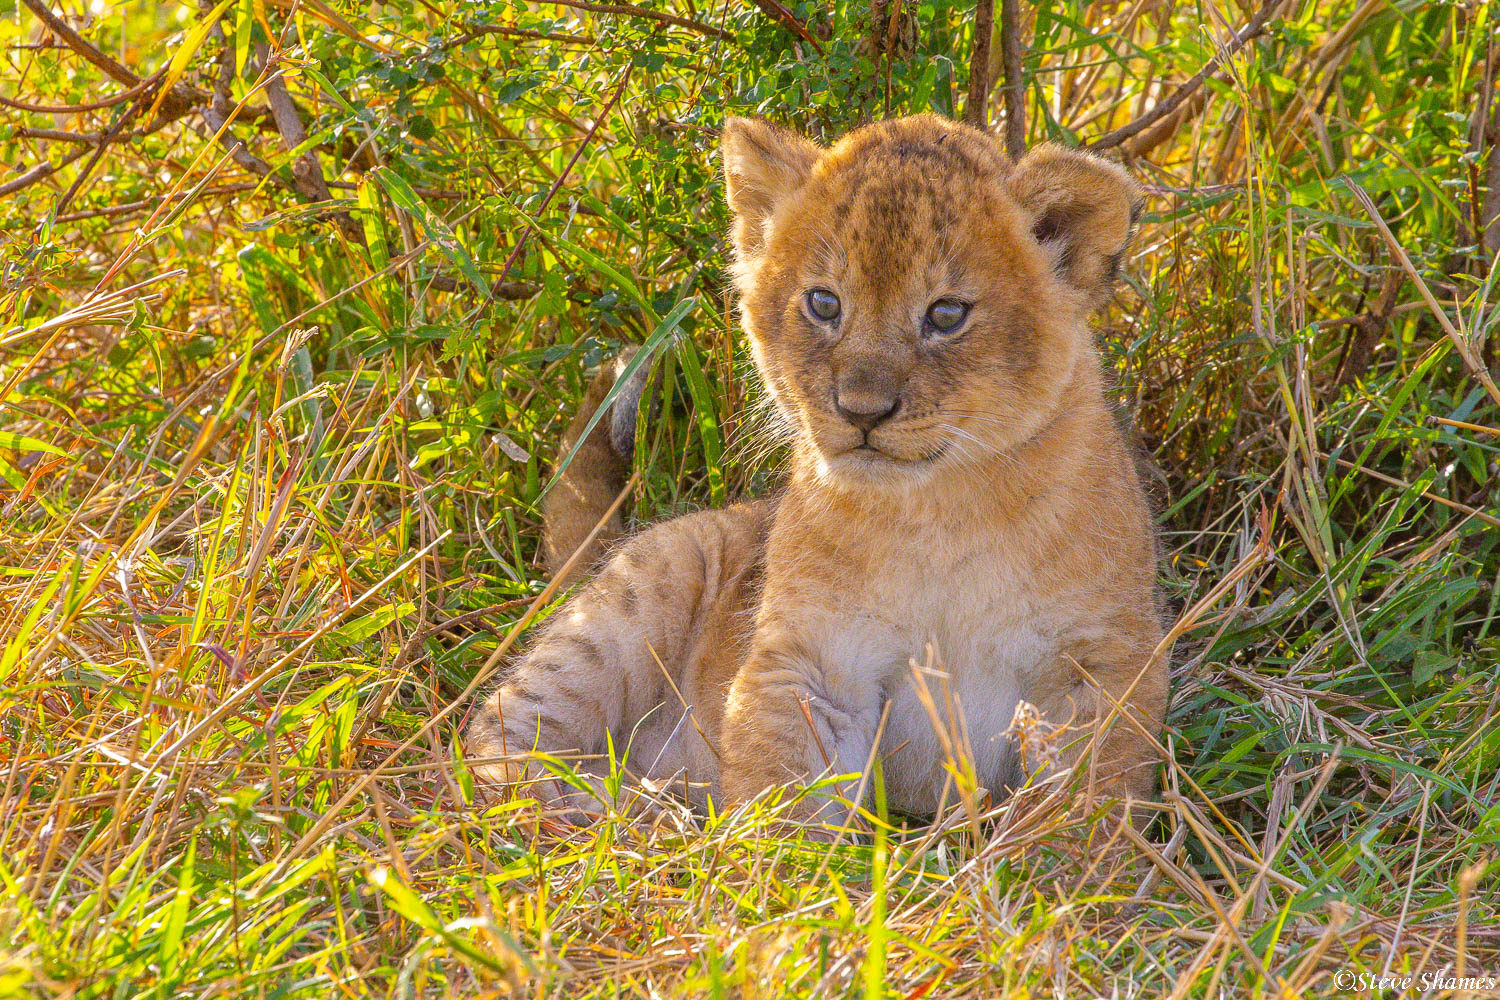 Little baby lion cub, waiting for mom to return.